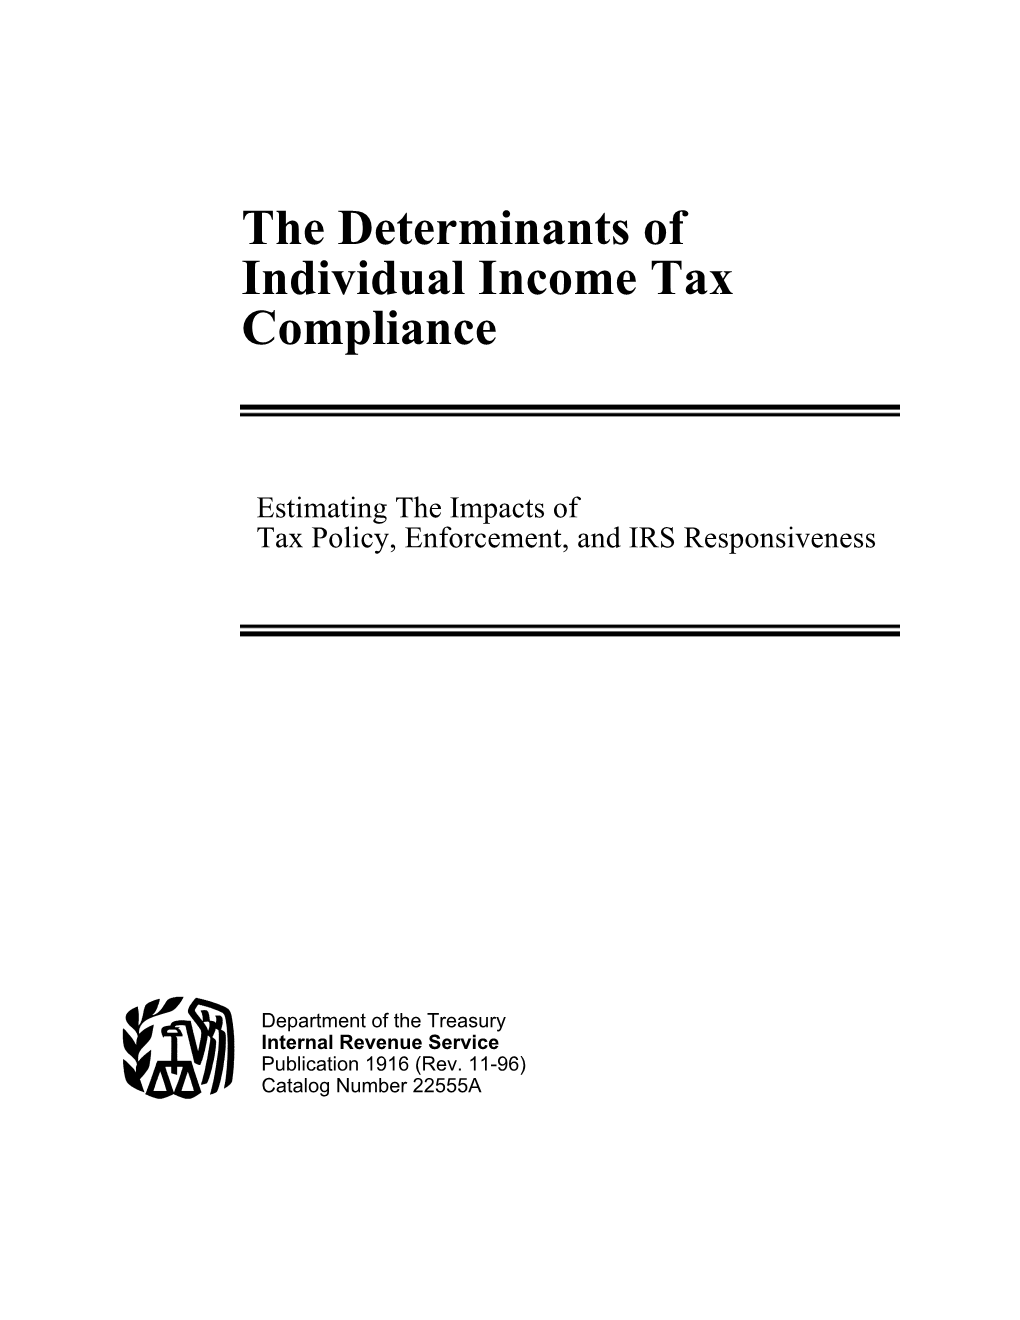 The Determinants of Individual Income Tax Compliance